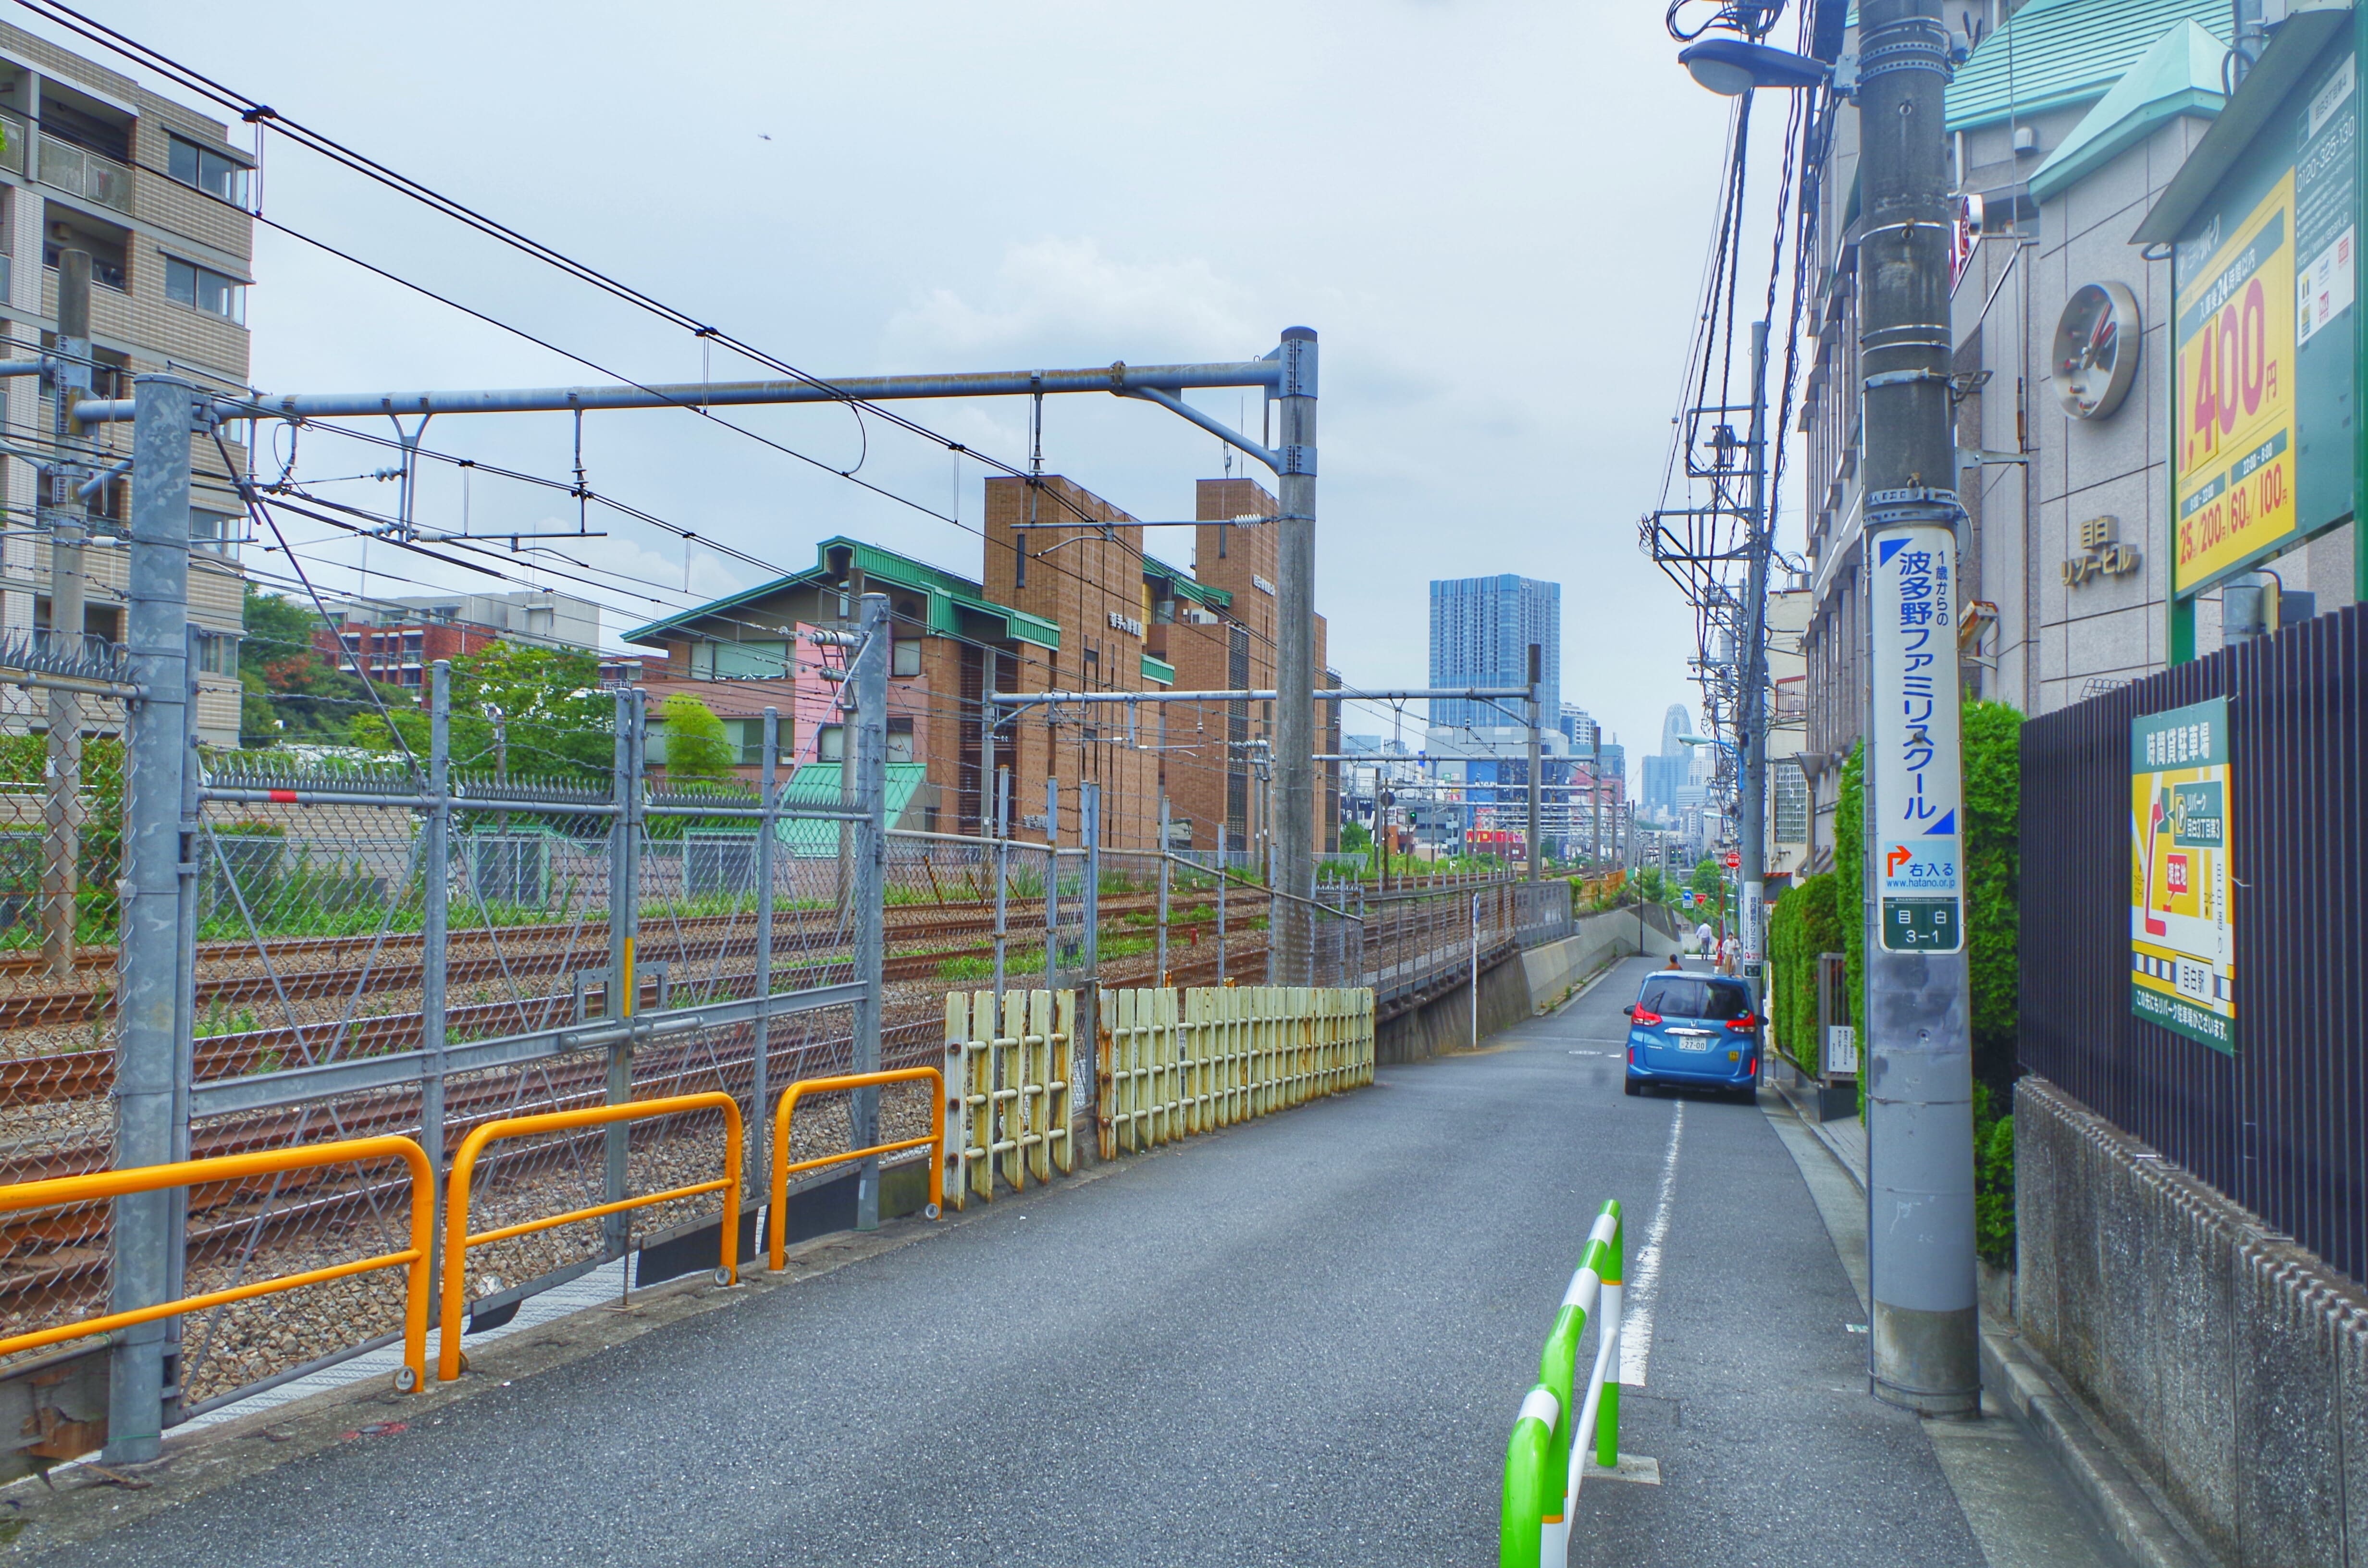 The line of the railway at Mejiro Station